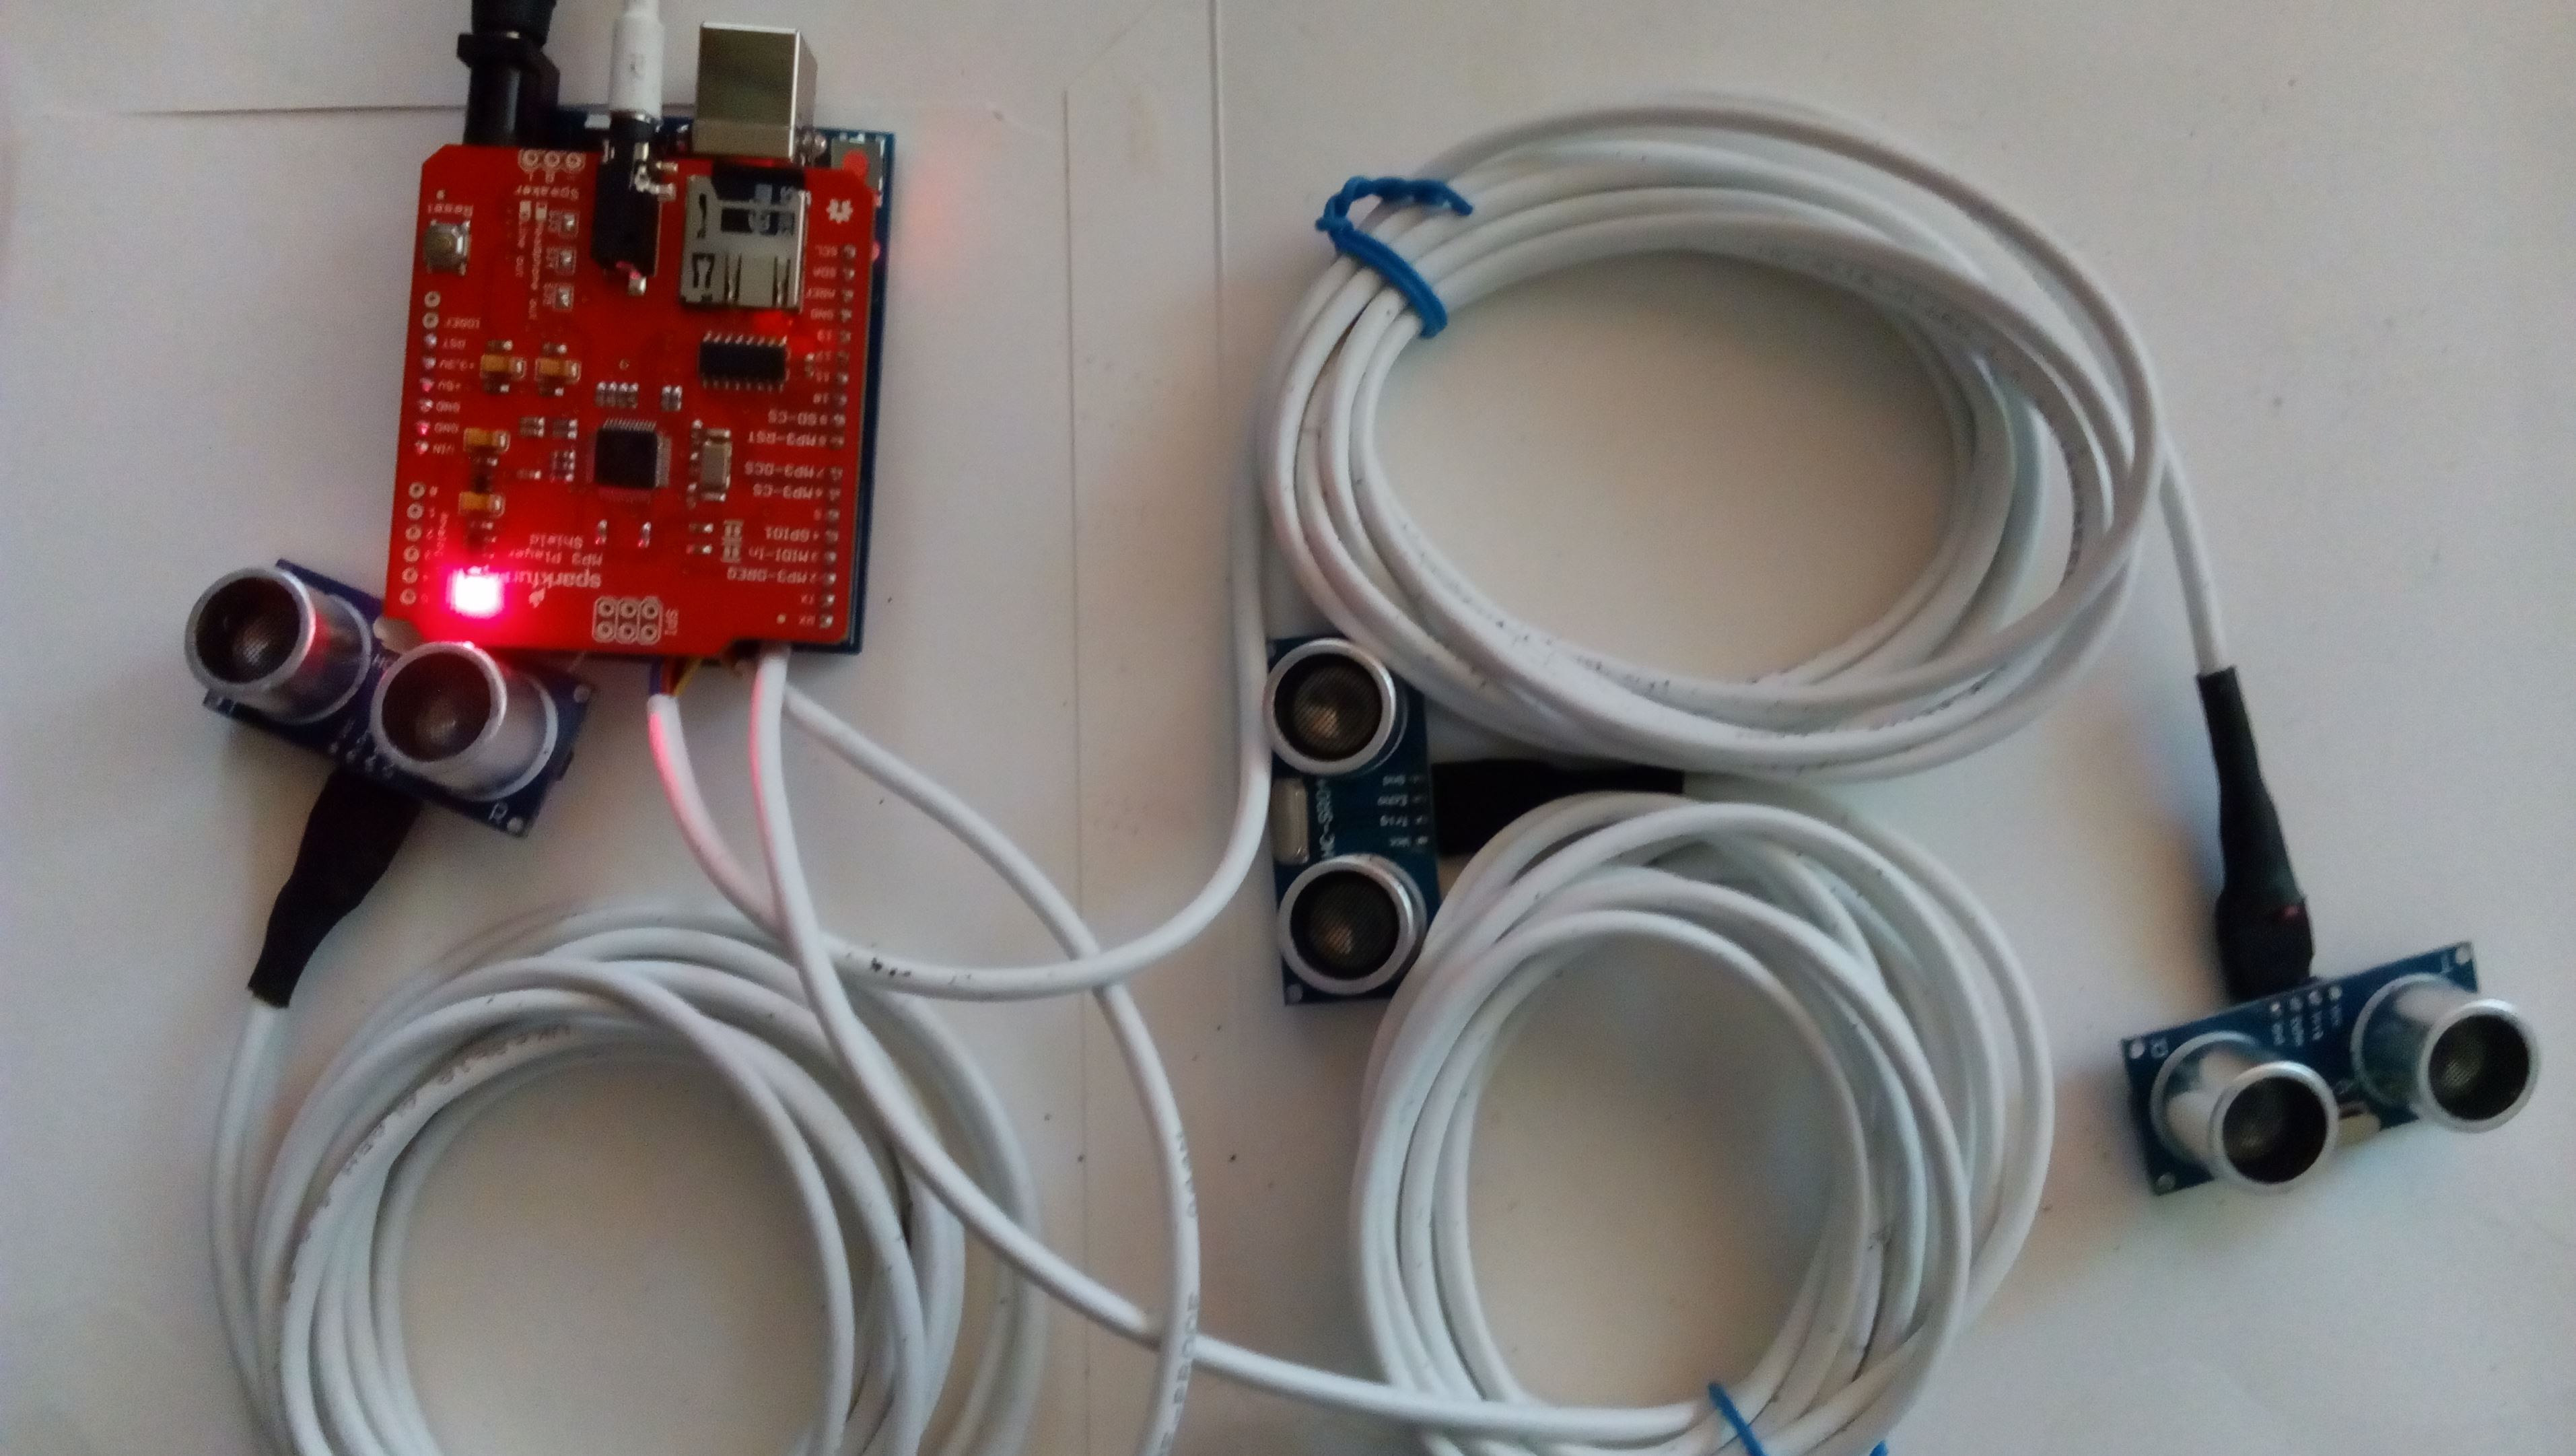 All components of alarm system without box